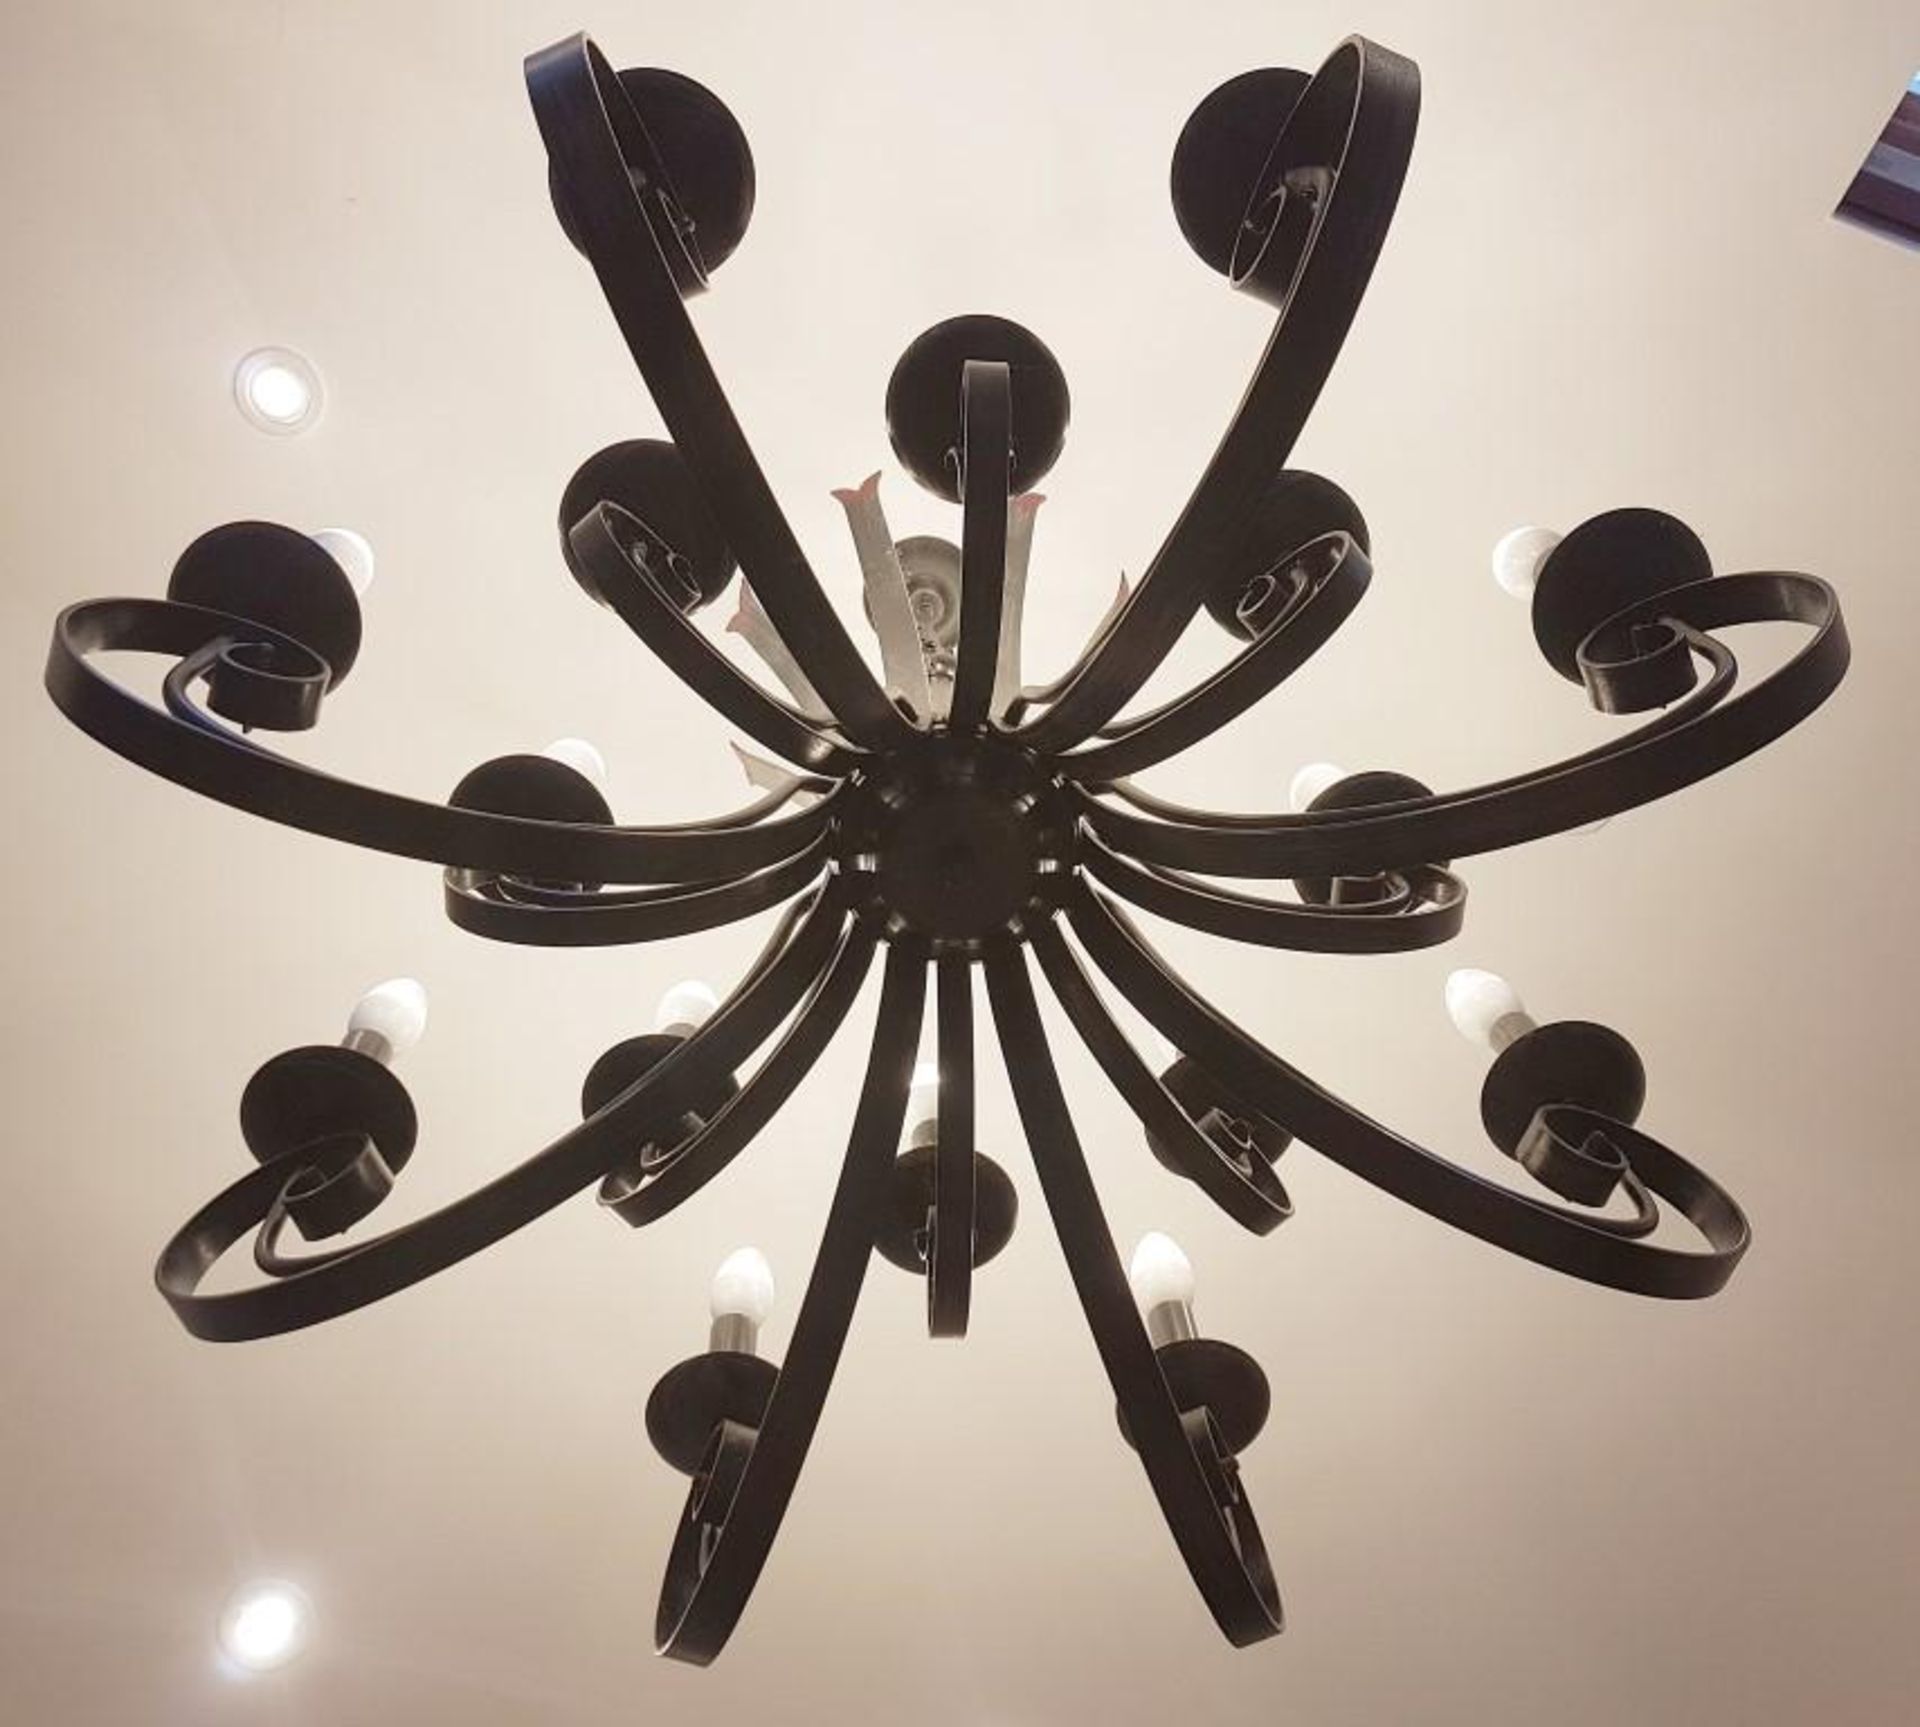 Impressive Bespoke 16-Sconce Wrought Iron Chandelier Light Fitting- CL266 - Used, In Very Good Condi - Image 2 of 4